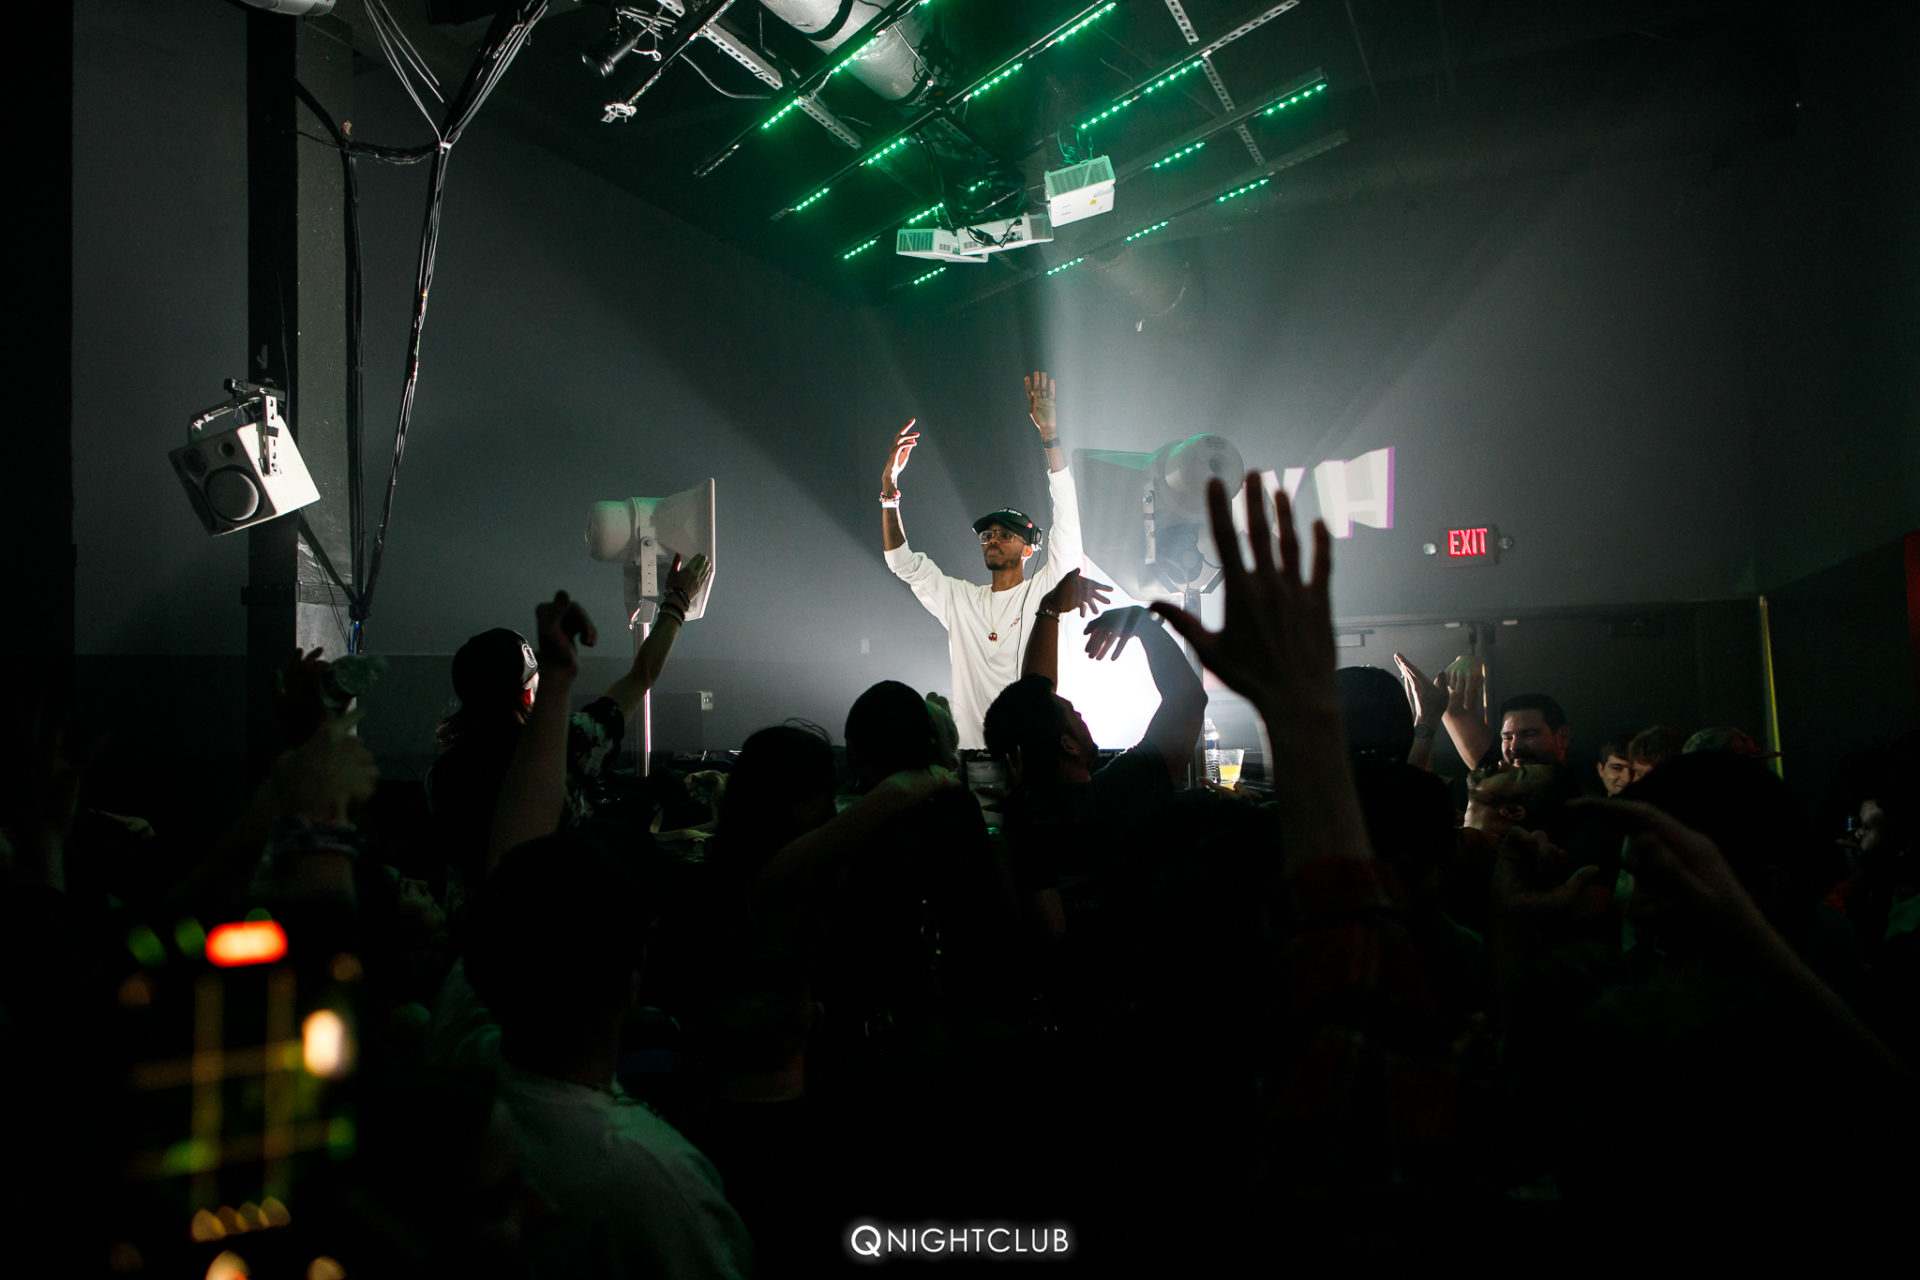 Tony H DJ'ing at Q Nightclub with hands up in air wearing white shirt, crowd also has hands in air.